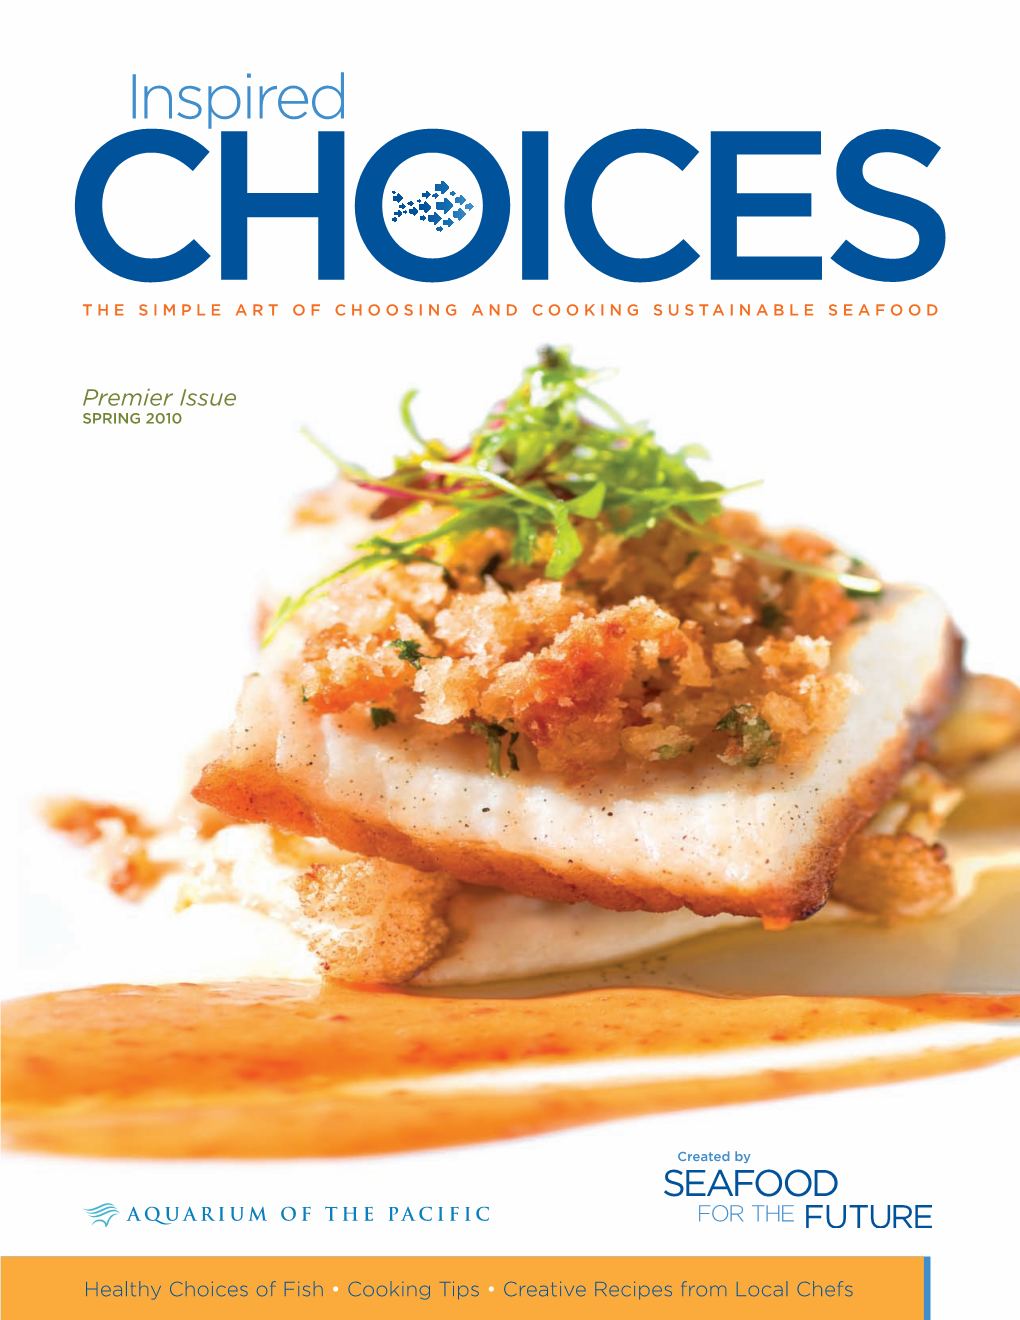 Inspired CHOICES the SIMPLE ART of CHOOSING and COOKING SUSTAINABLE SEAFOOD